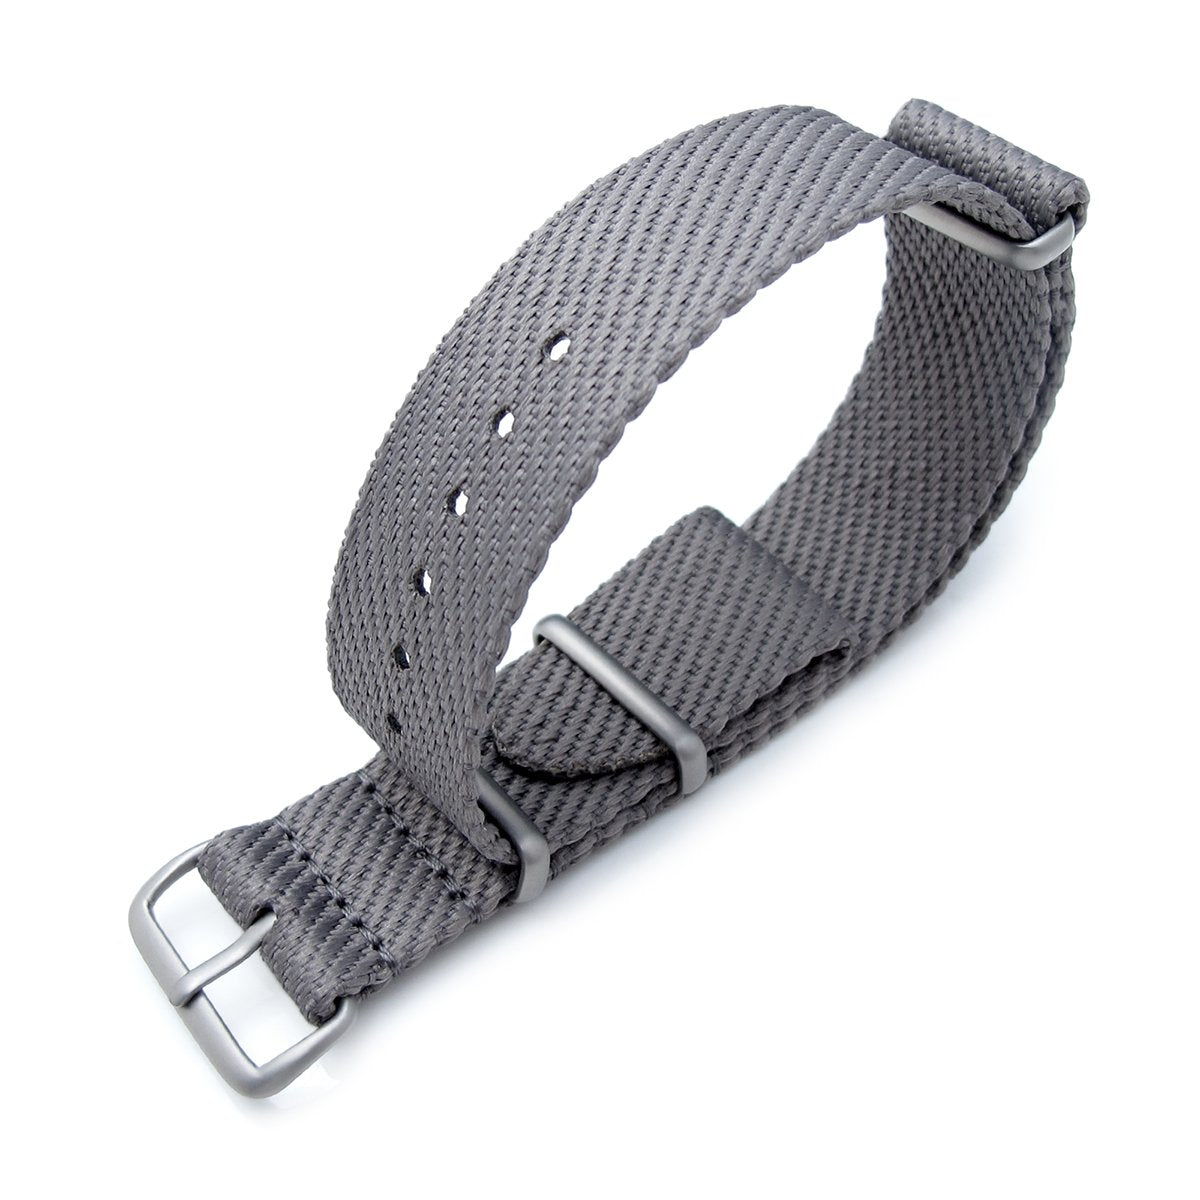 MiLTAT 20mm G10 Military NATO Watch Strap Waffle Nylon Armband Brushed Military Grey Strapcode Watch Bands